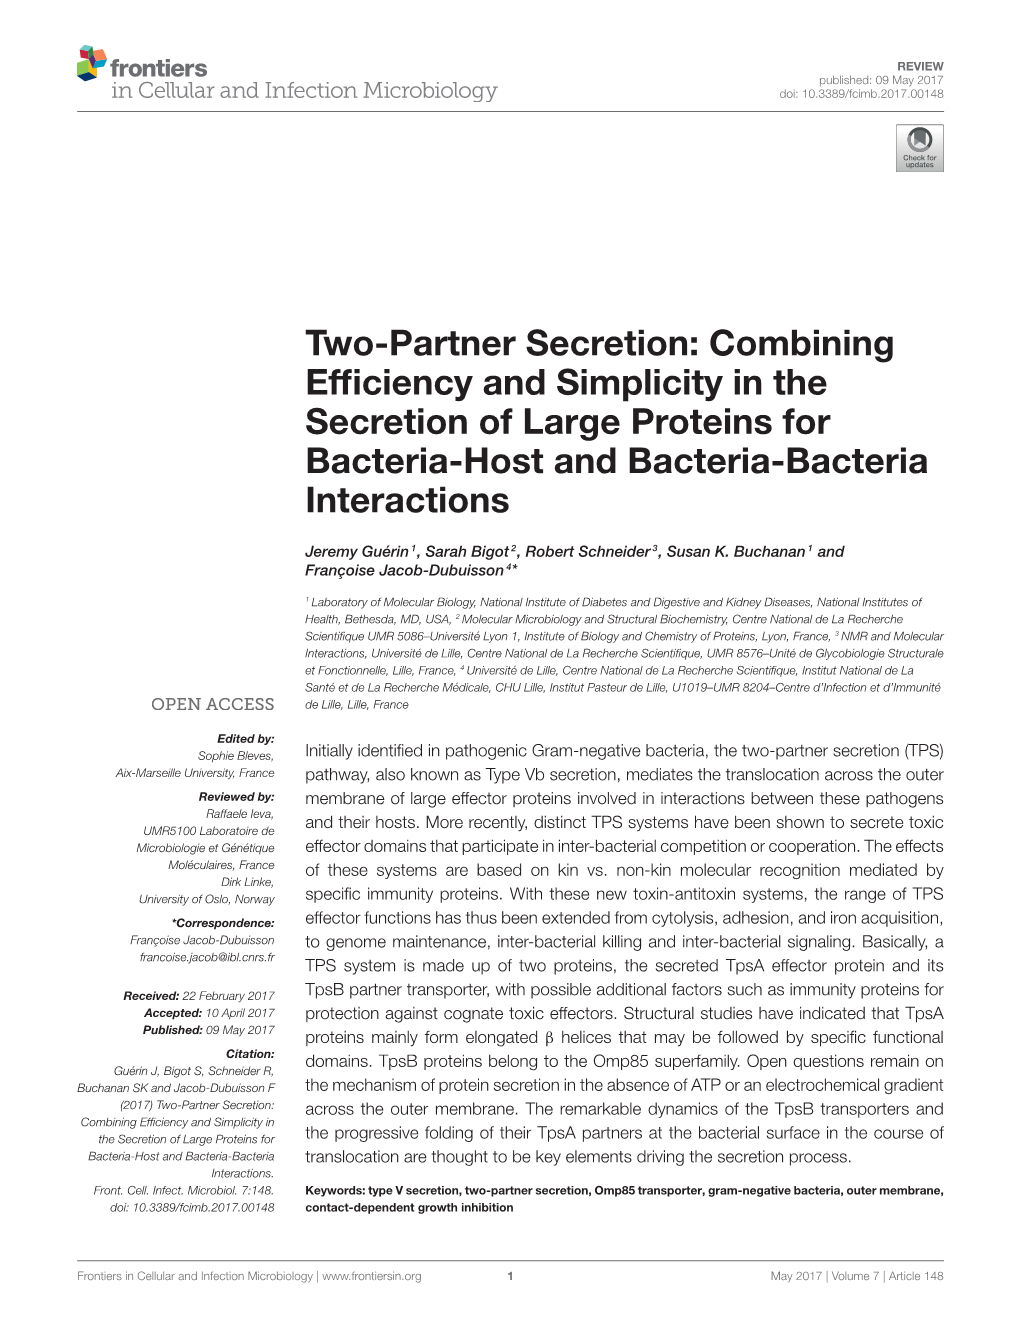 Two-Partner Secretion: Combining Efﬁciency and Simplicity in the Secretion of Large Proteins for Bacteria-Host and Bacteria-Bacteria Interactions